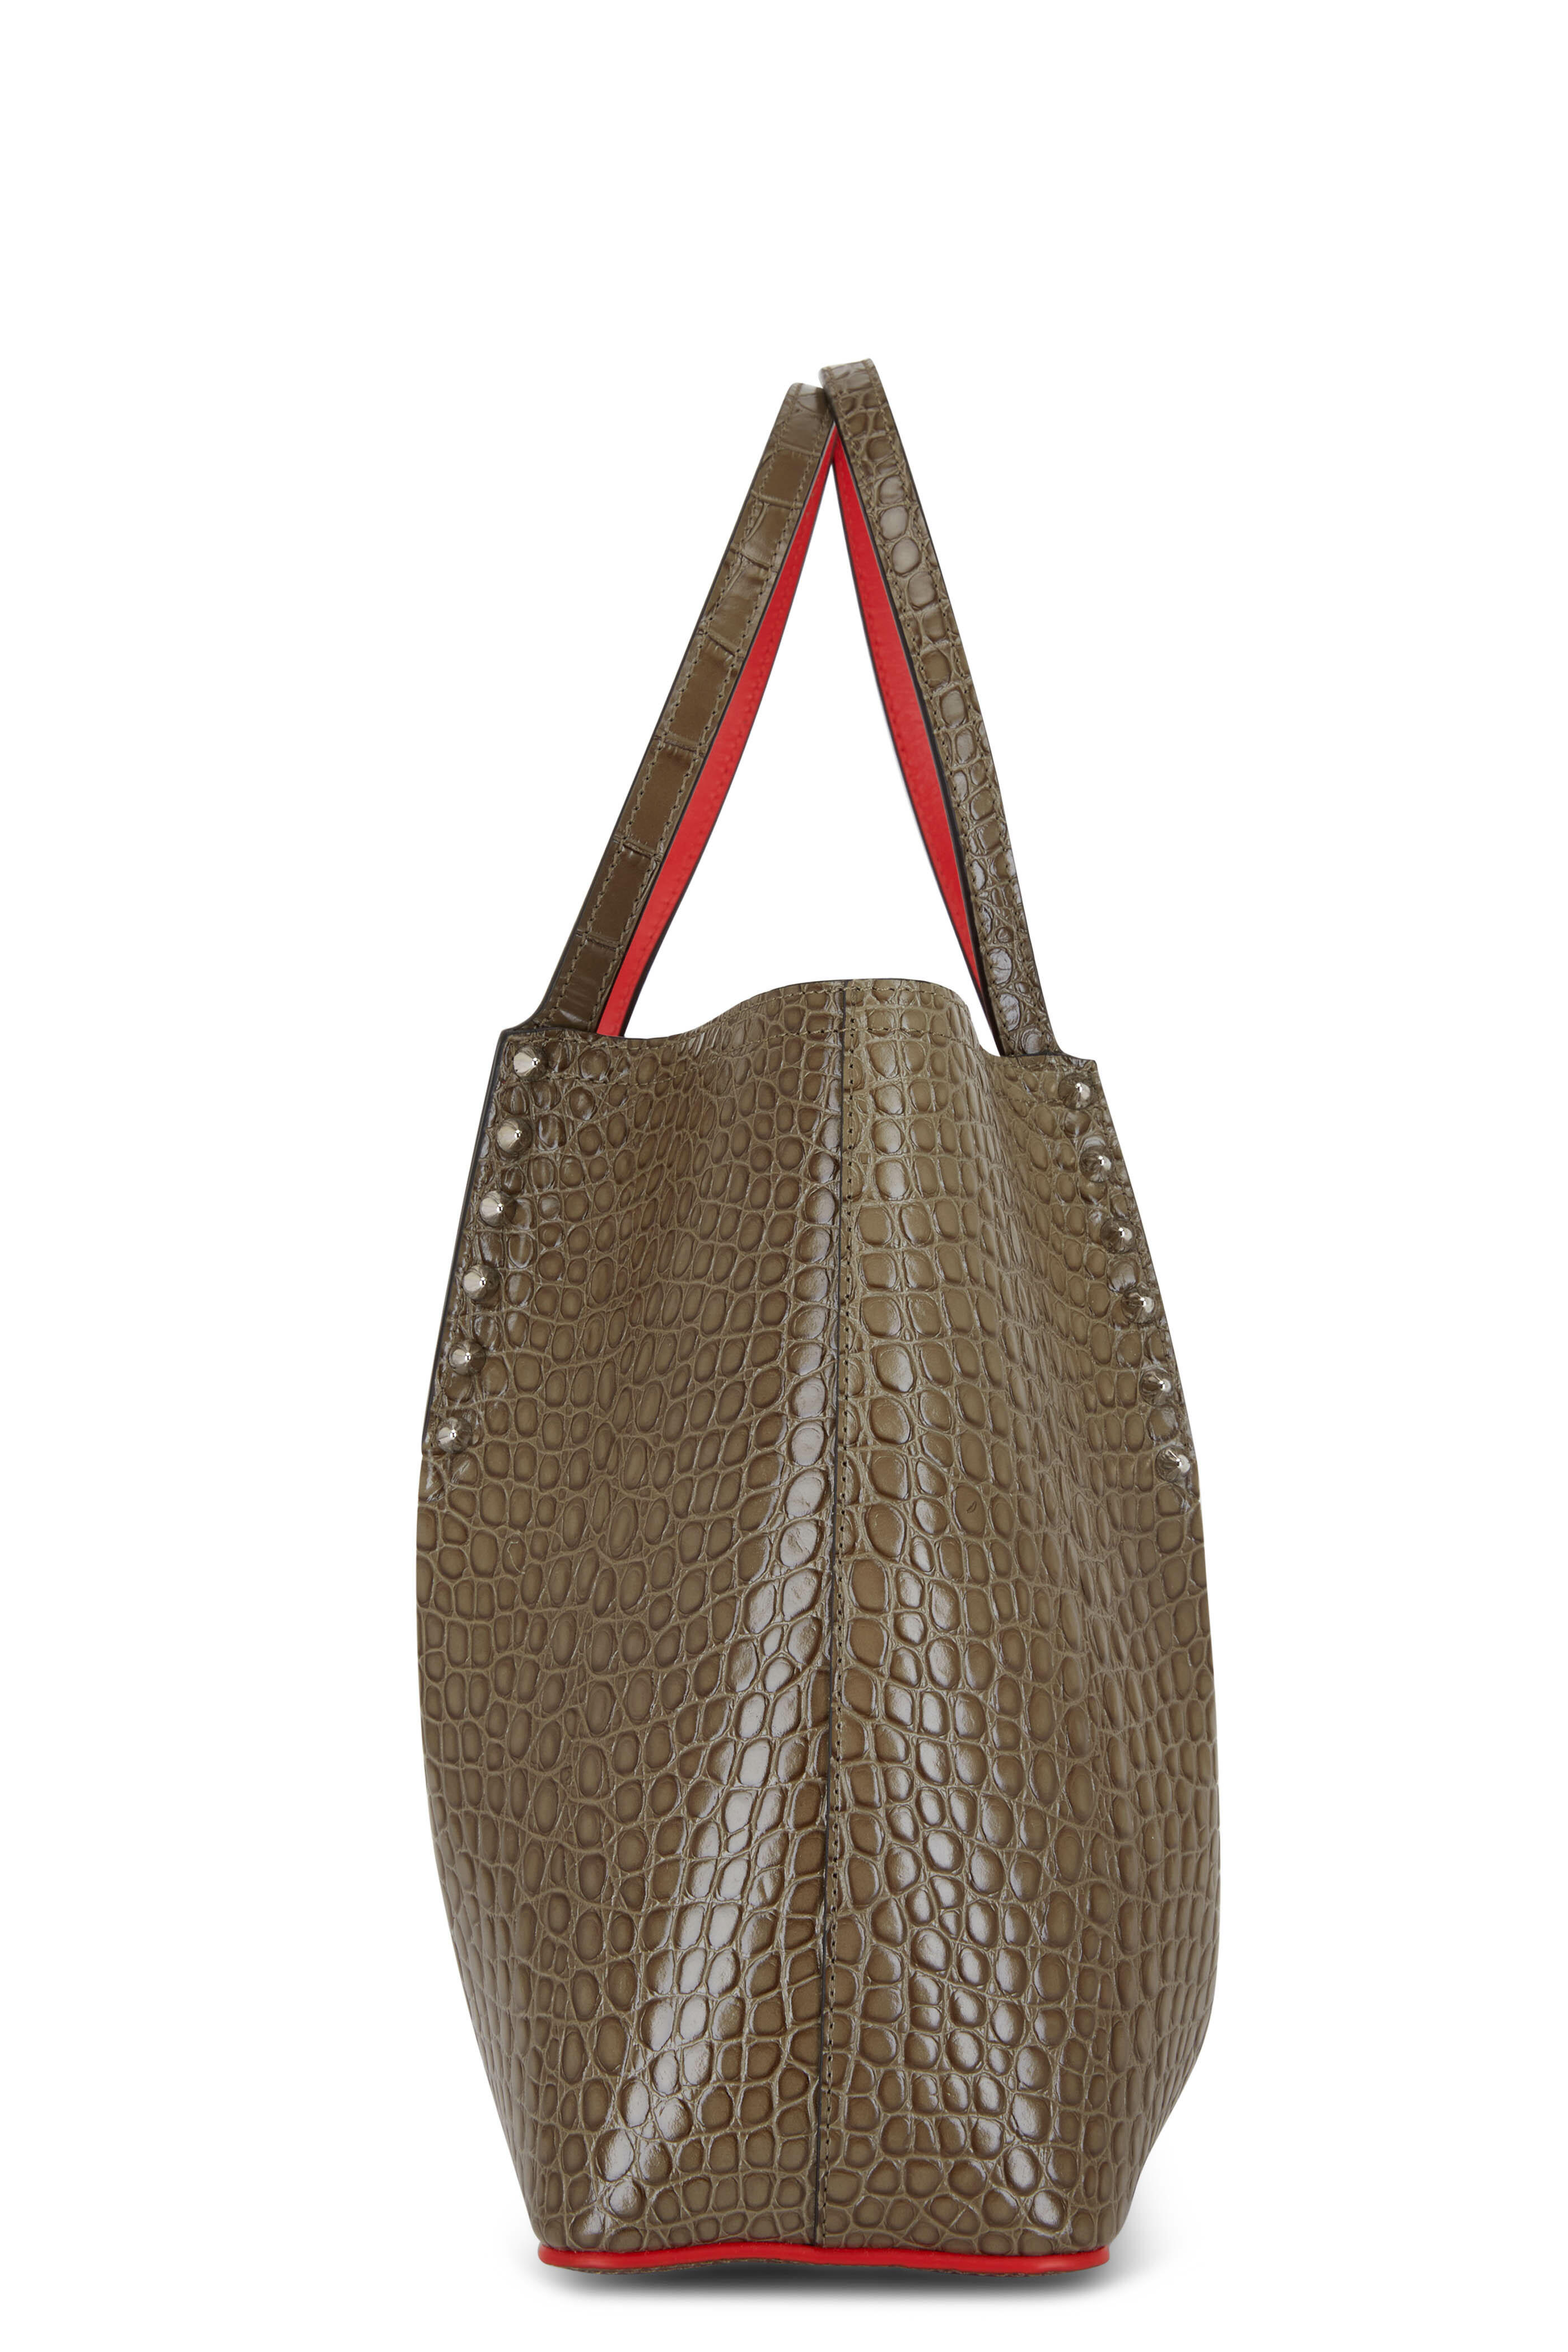 CHRISTIAN LOUBOUTIN Small Cabarock Croc-Embossed Leather Tote Bag